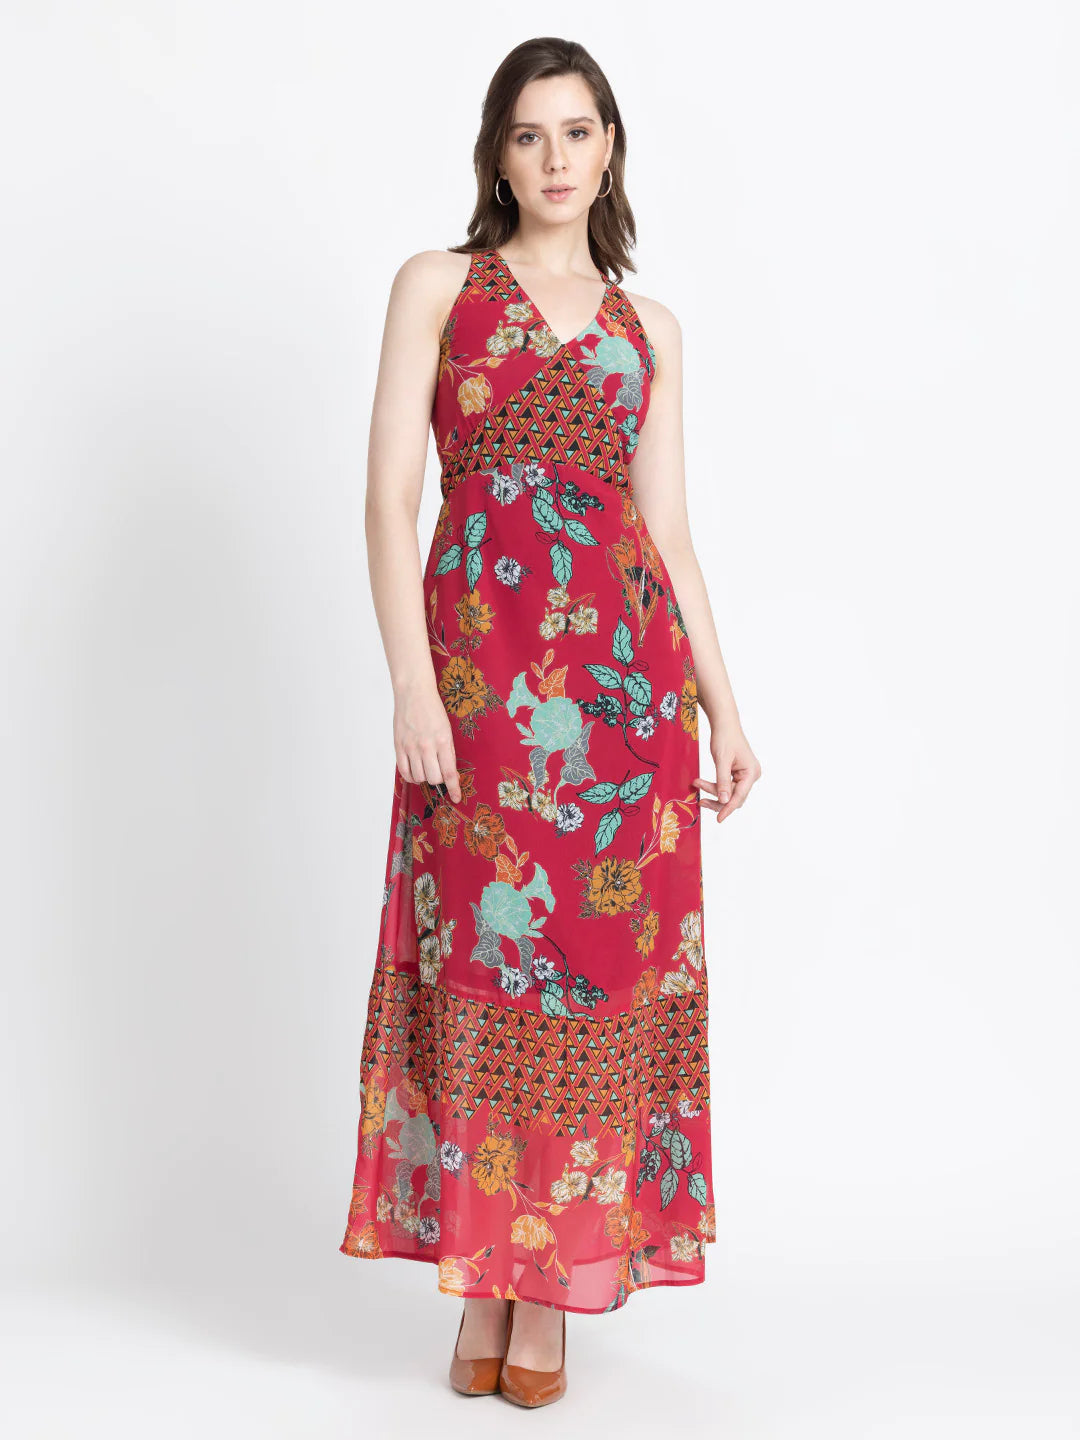 Red Floral Maxi Dress | Red Halter Floral Maxi Dress